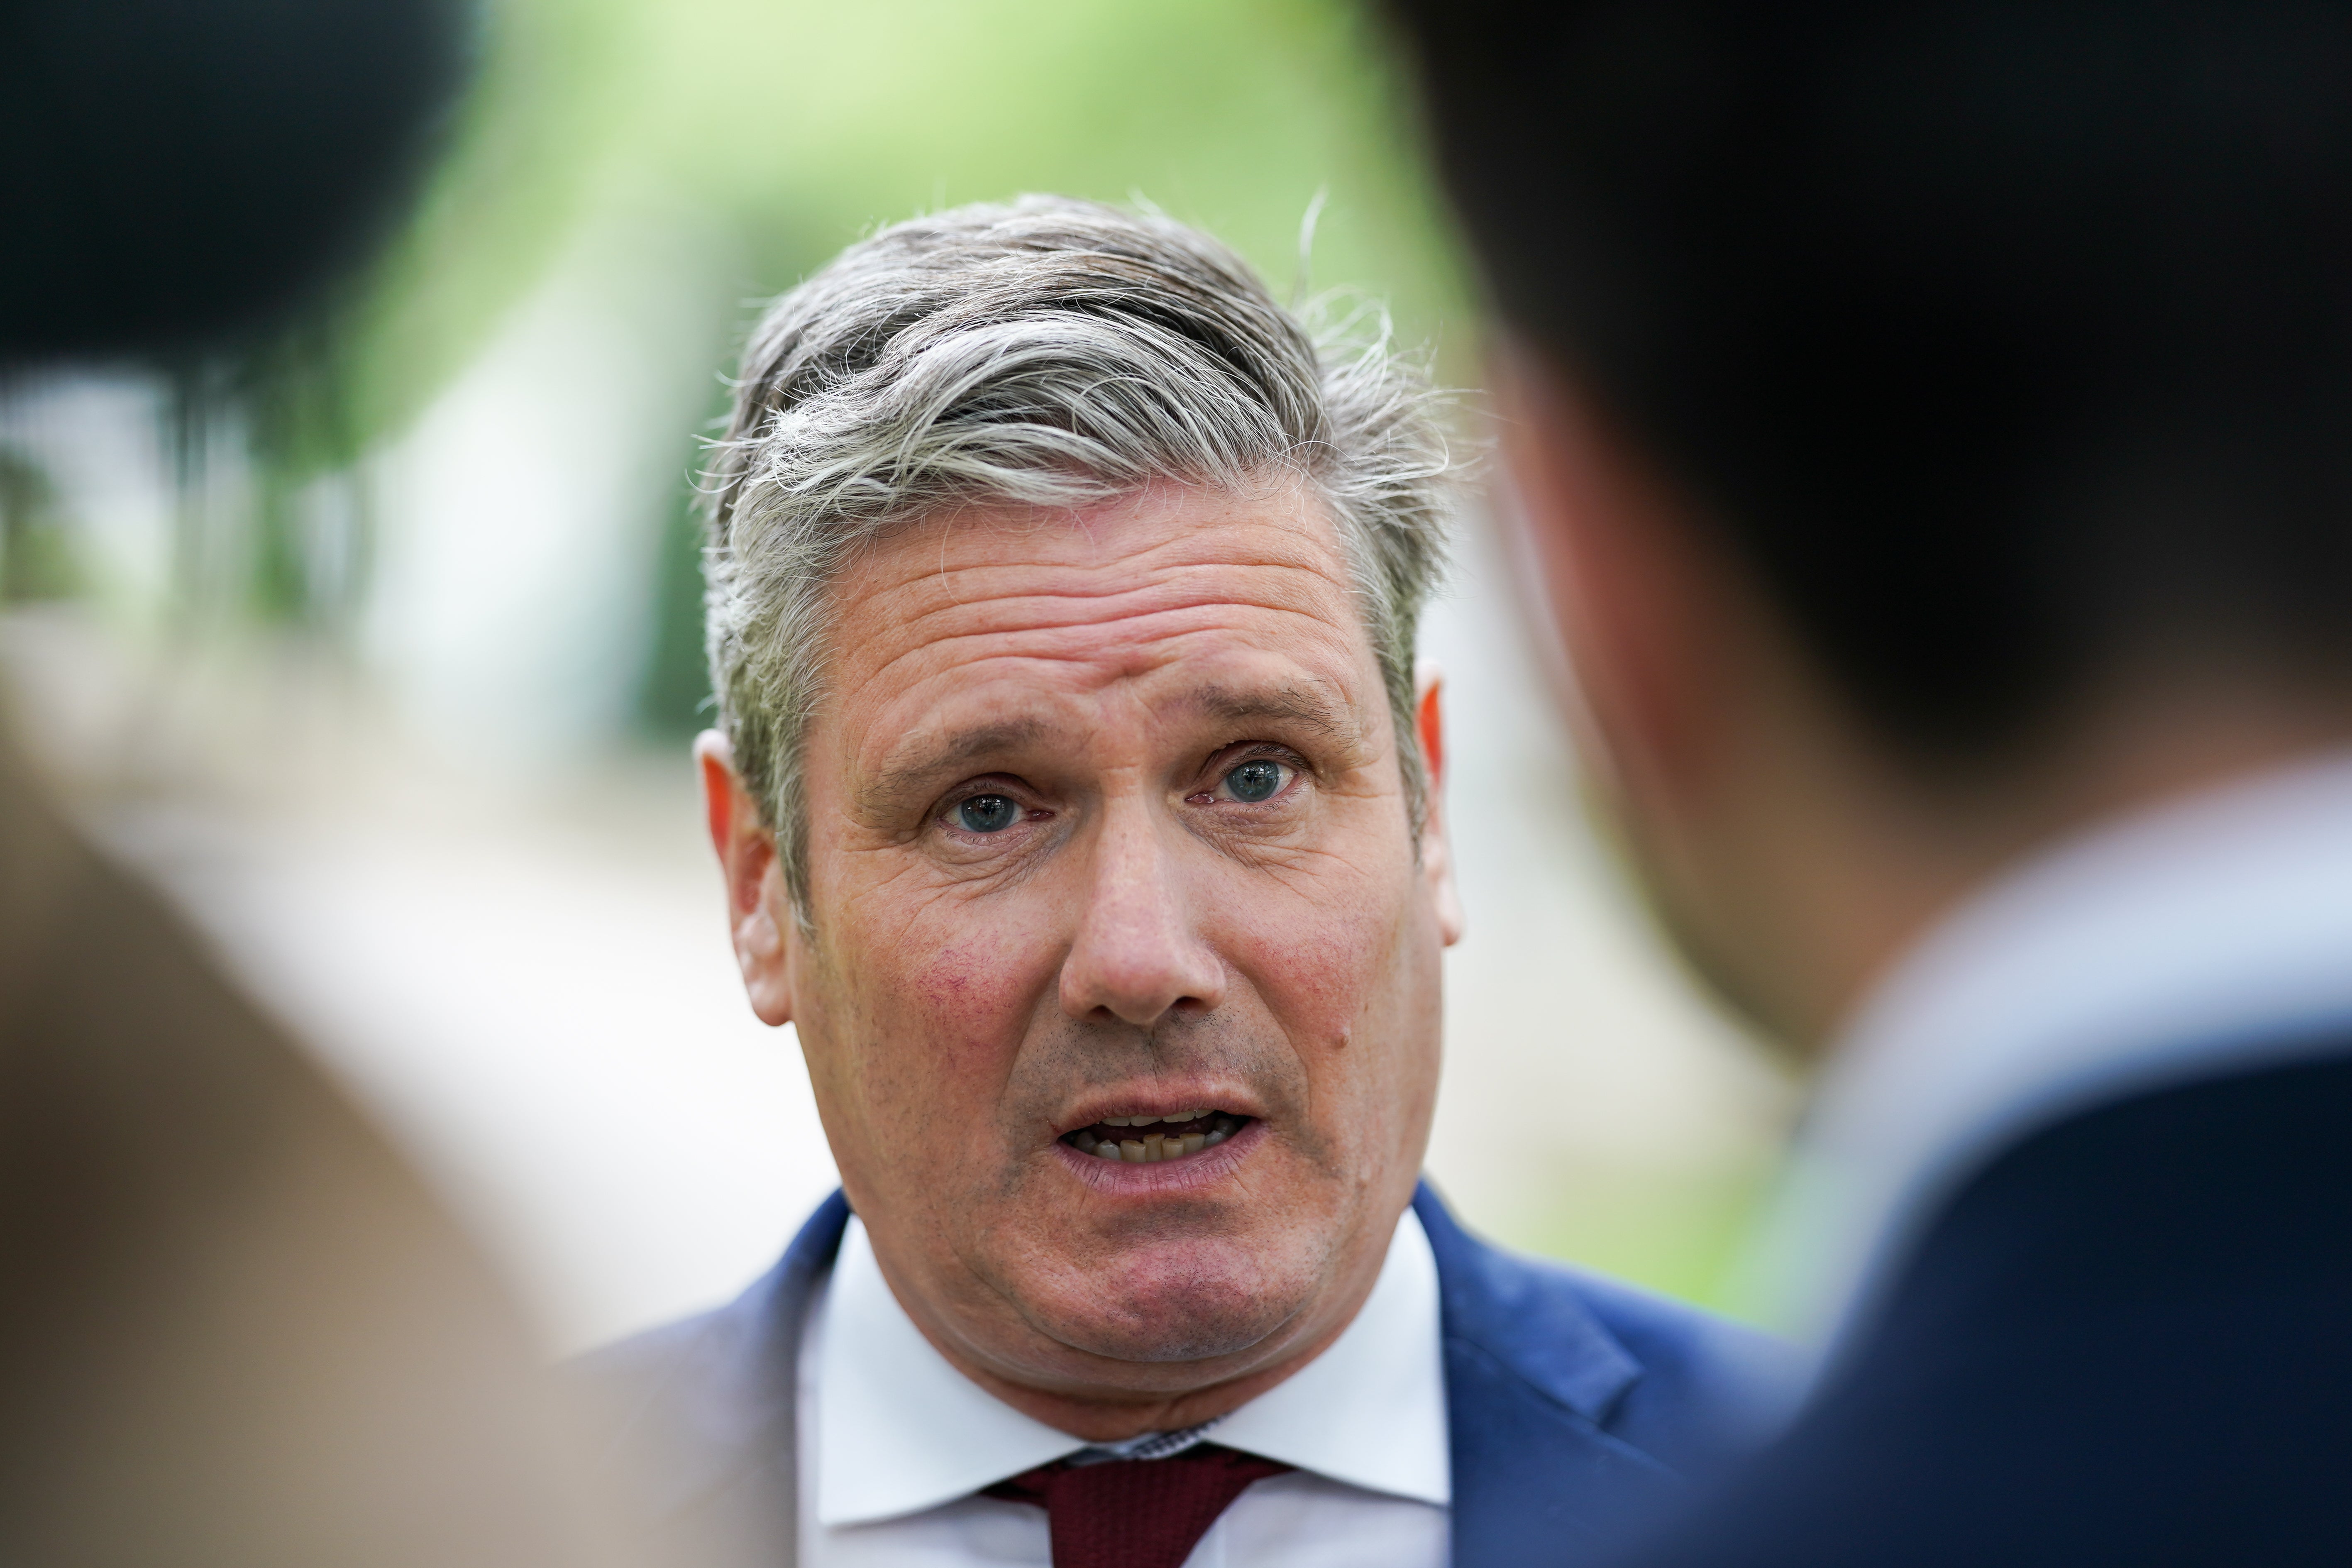 Starmer has passed the test, but because this is not yet widely known, it lies like an unexploded mine on the Conservatives’ road to the next election